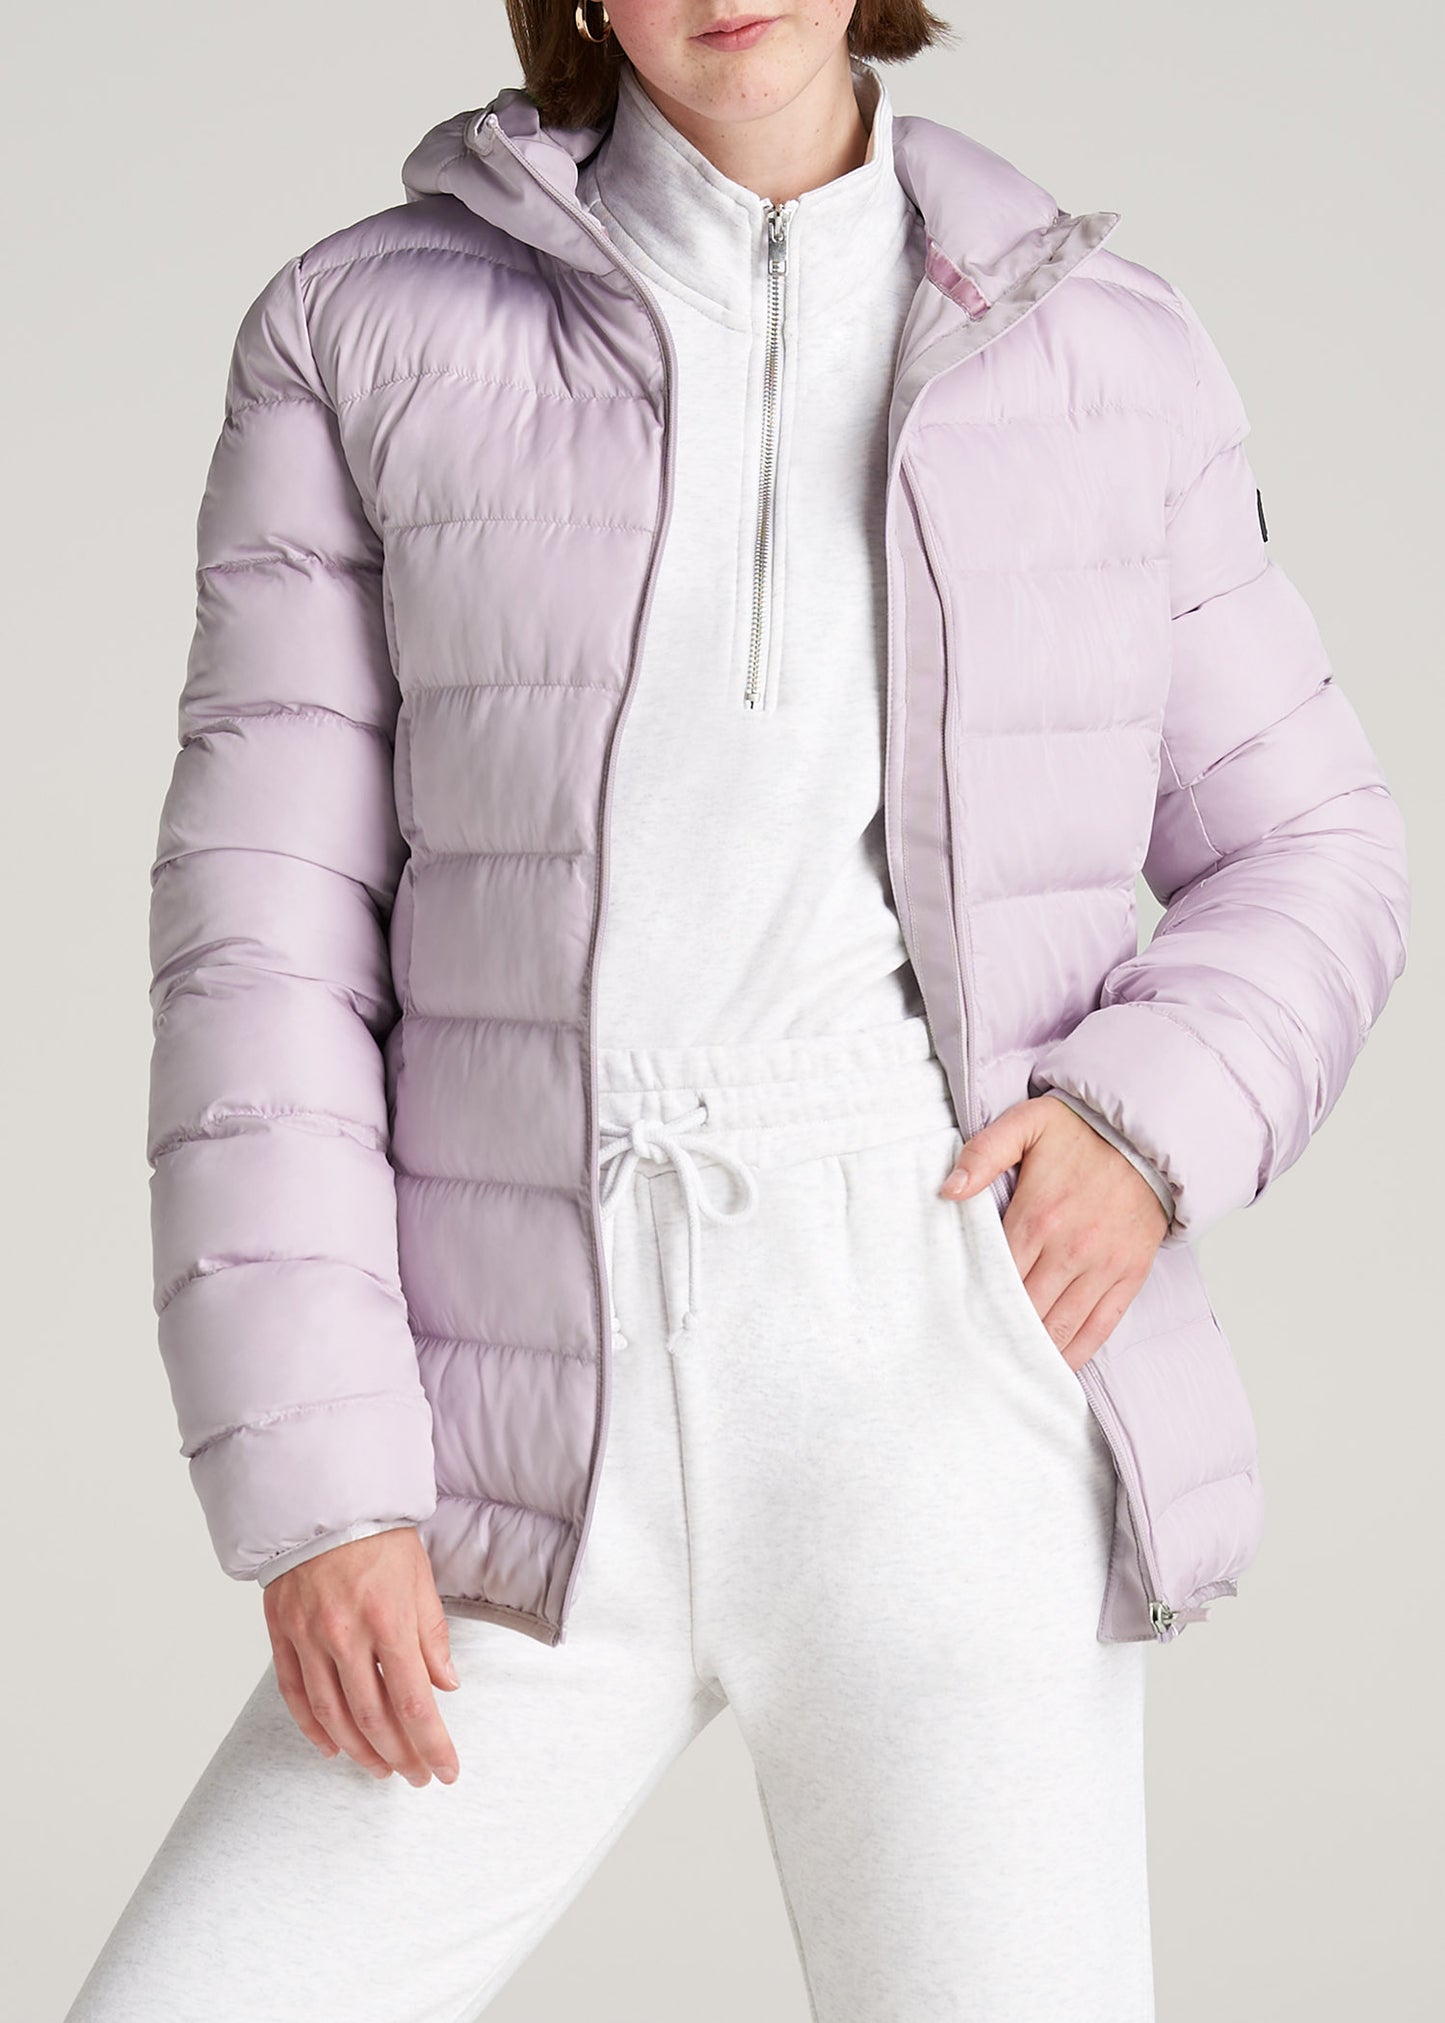 A tall woman wearing American Tall's Women's Tall Hooded Puffer Jacket in Lavender Fog.